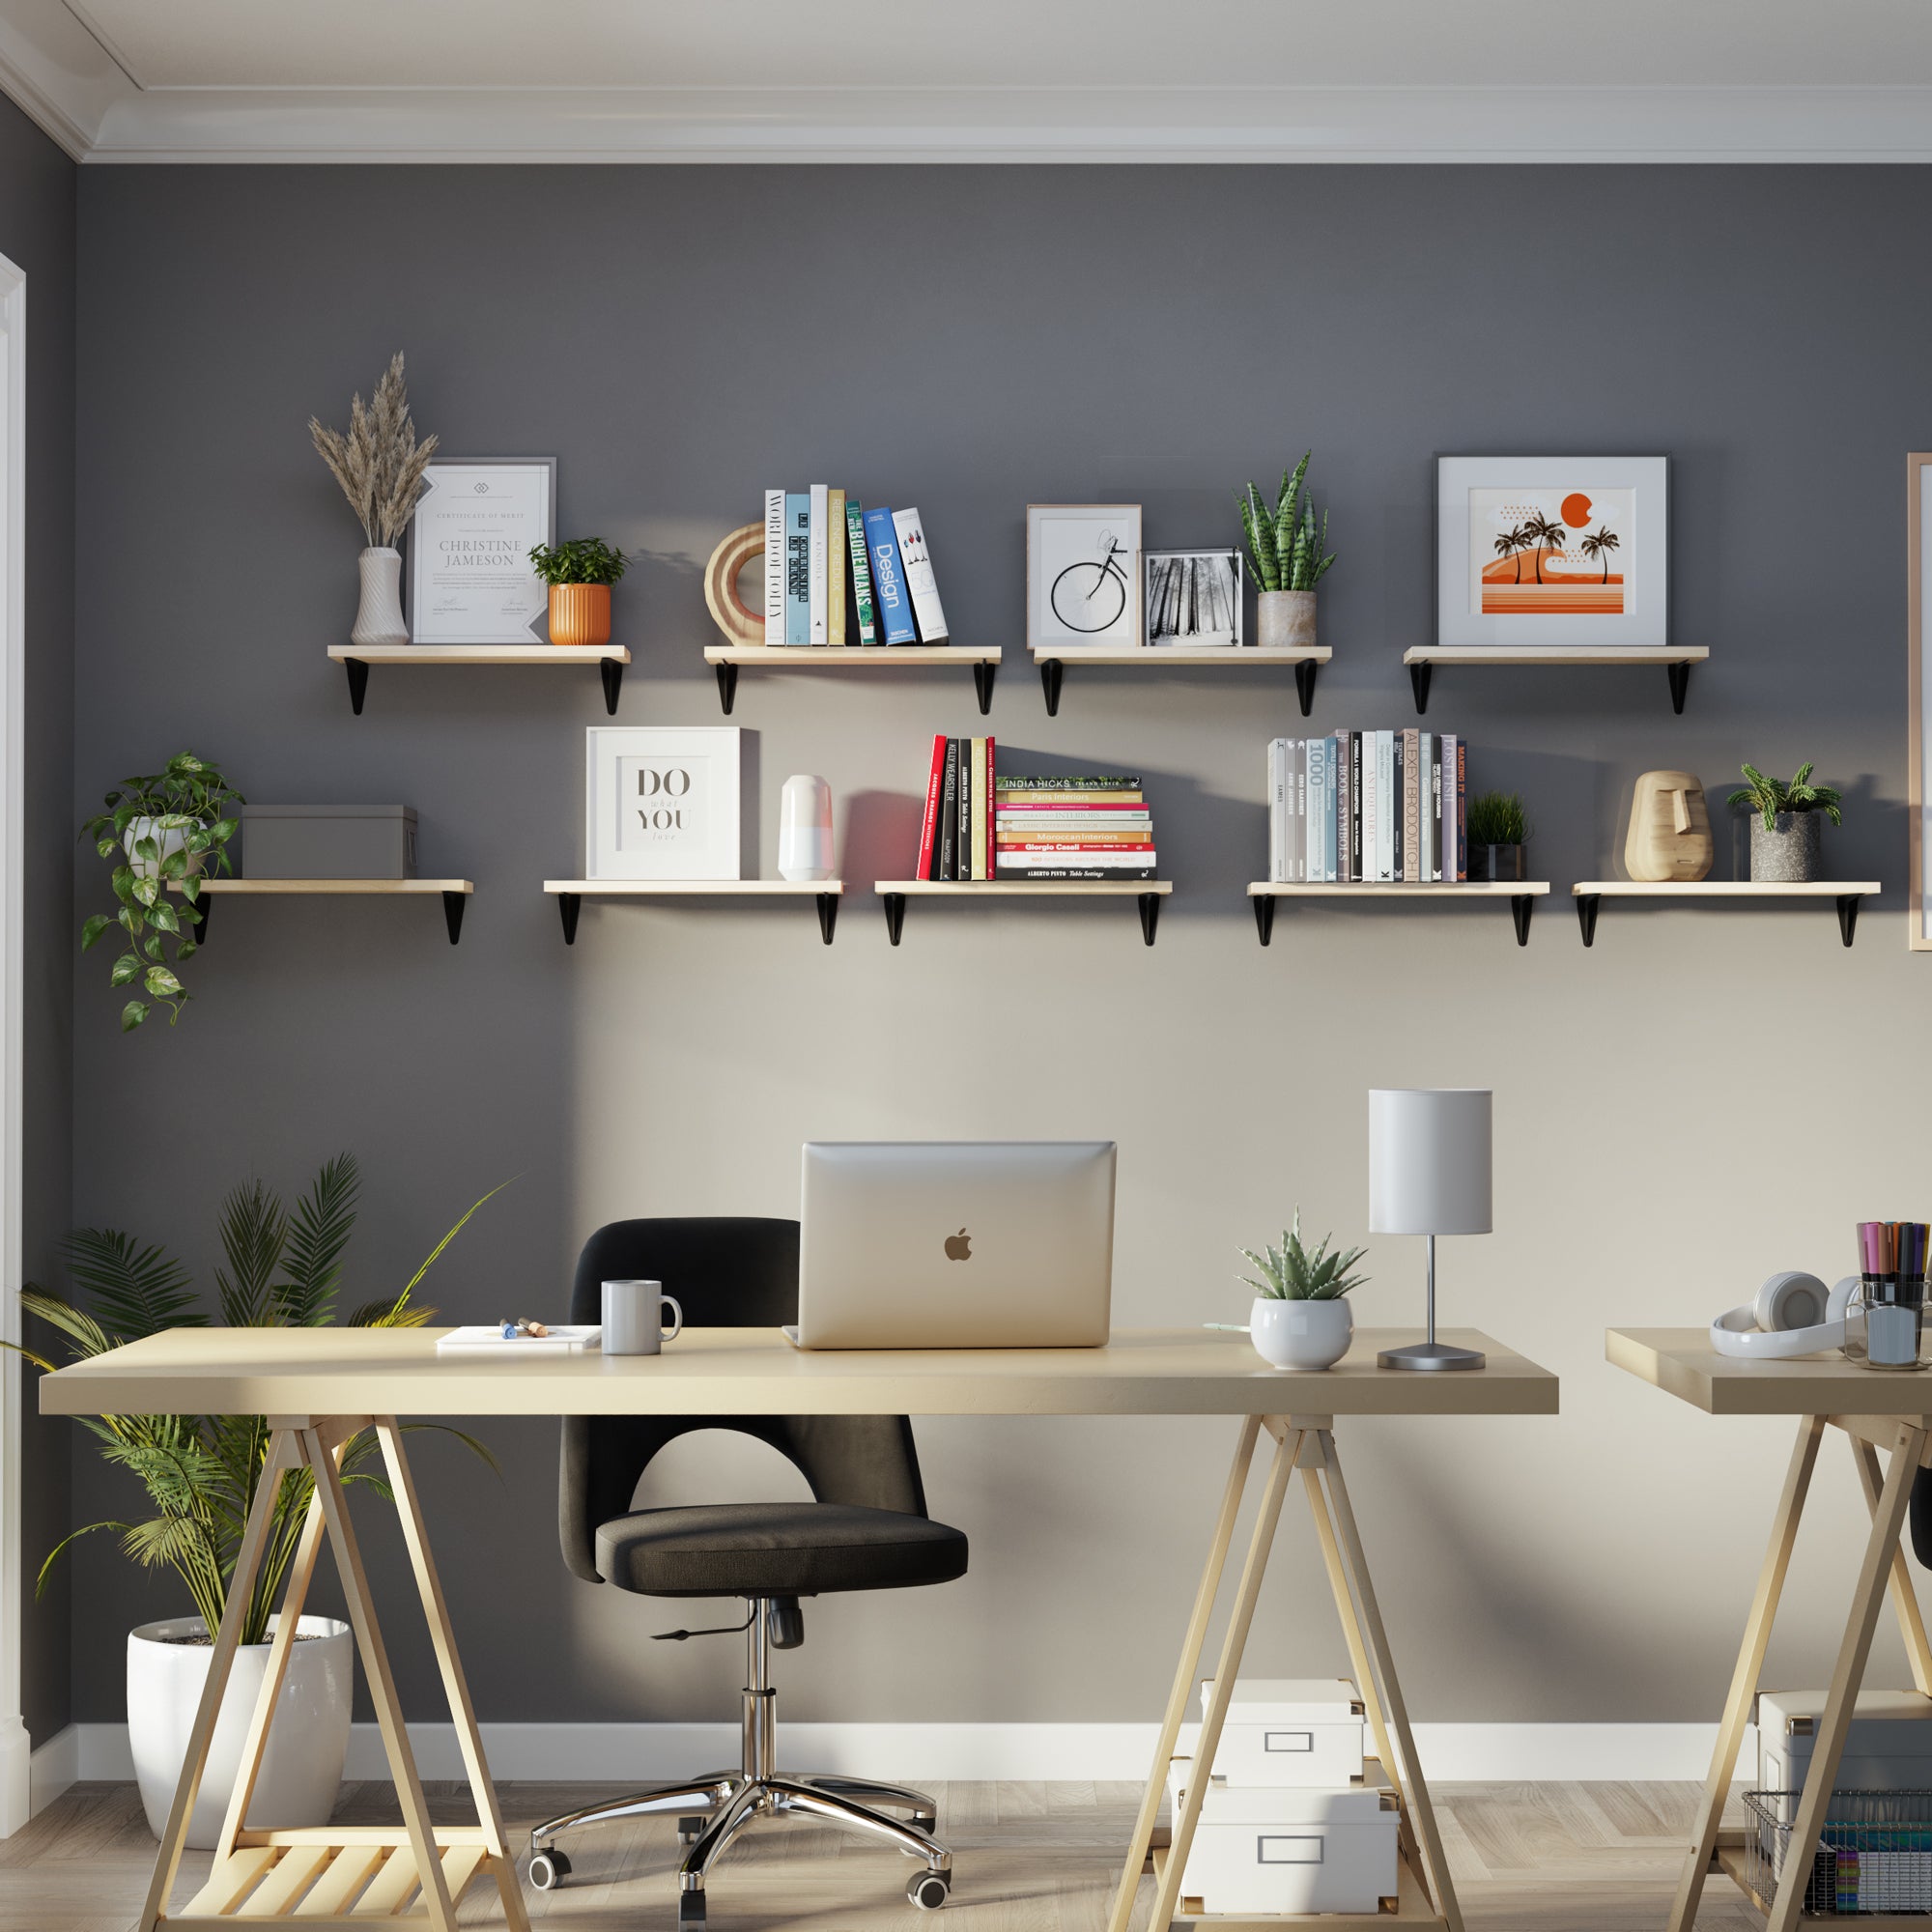 Modern home office with floating organizer shelves supported by black l metal brackets for books and decor.